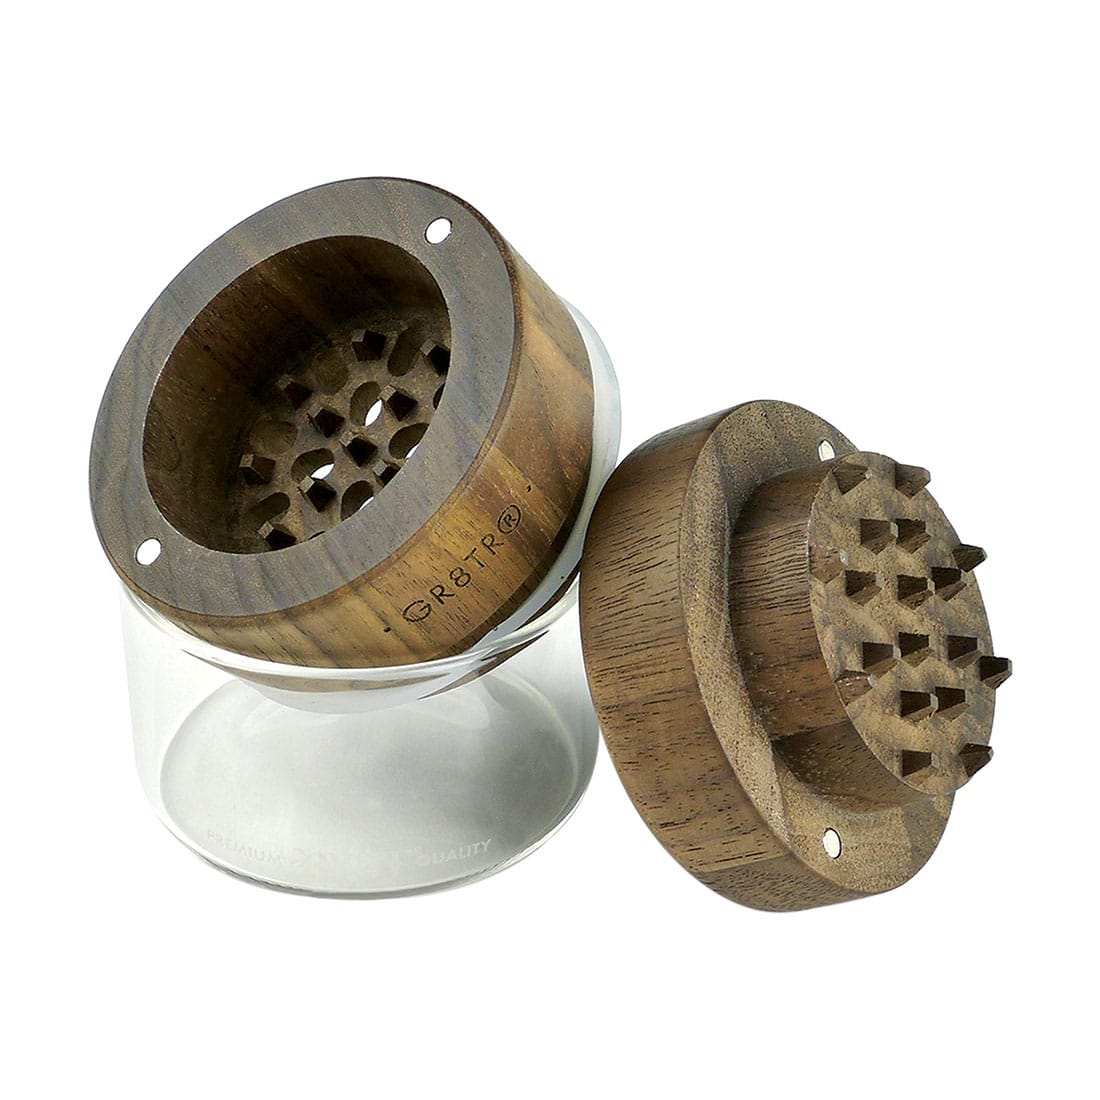 RYOT Walnut Wood GR8TR Grinder with Glass Jar, 2.5" - Open View Showing Teeth